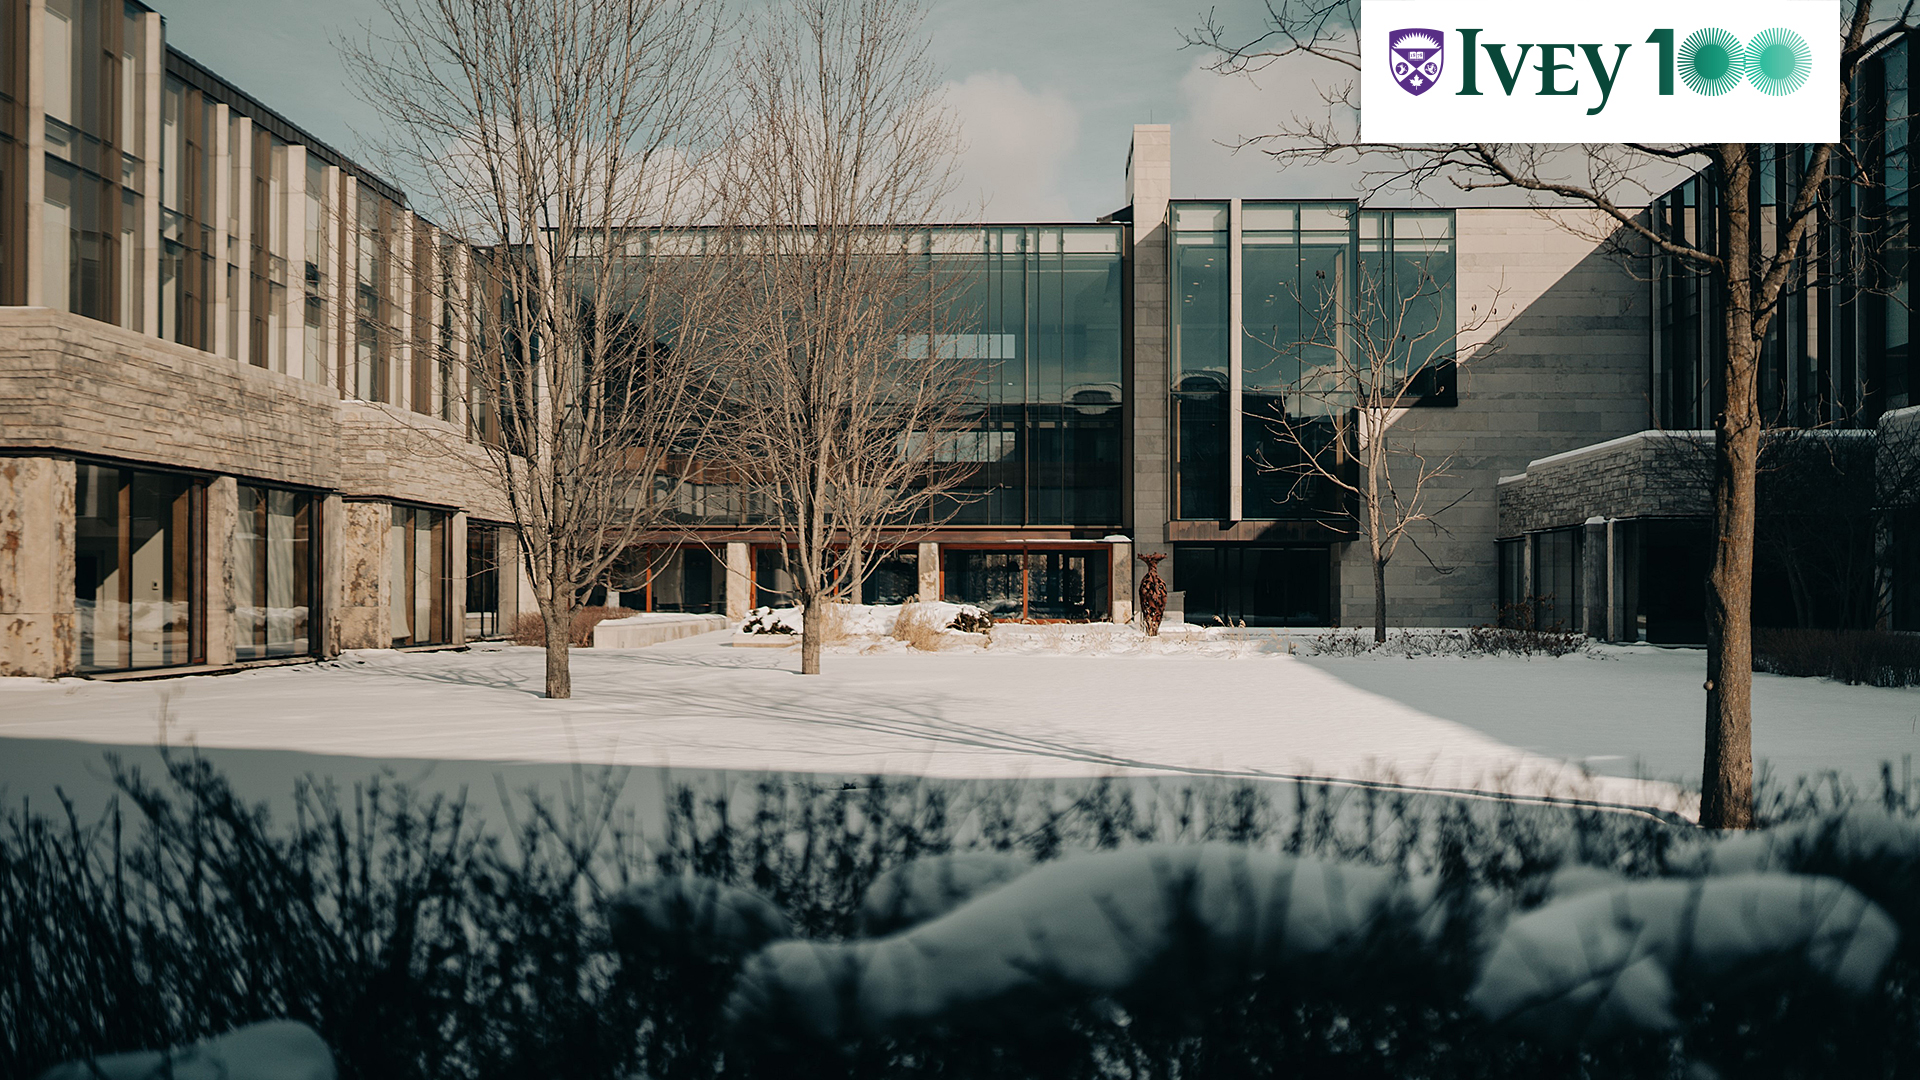 Standard zoom background image - Richard Ivey building Quad in the Winter